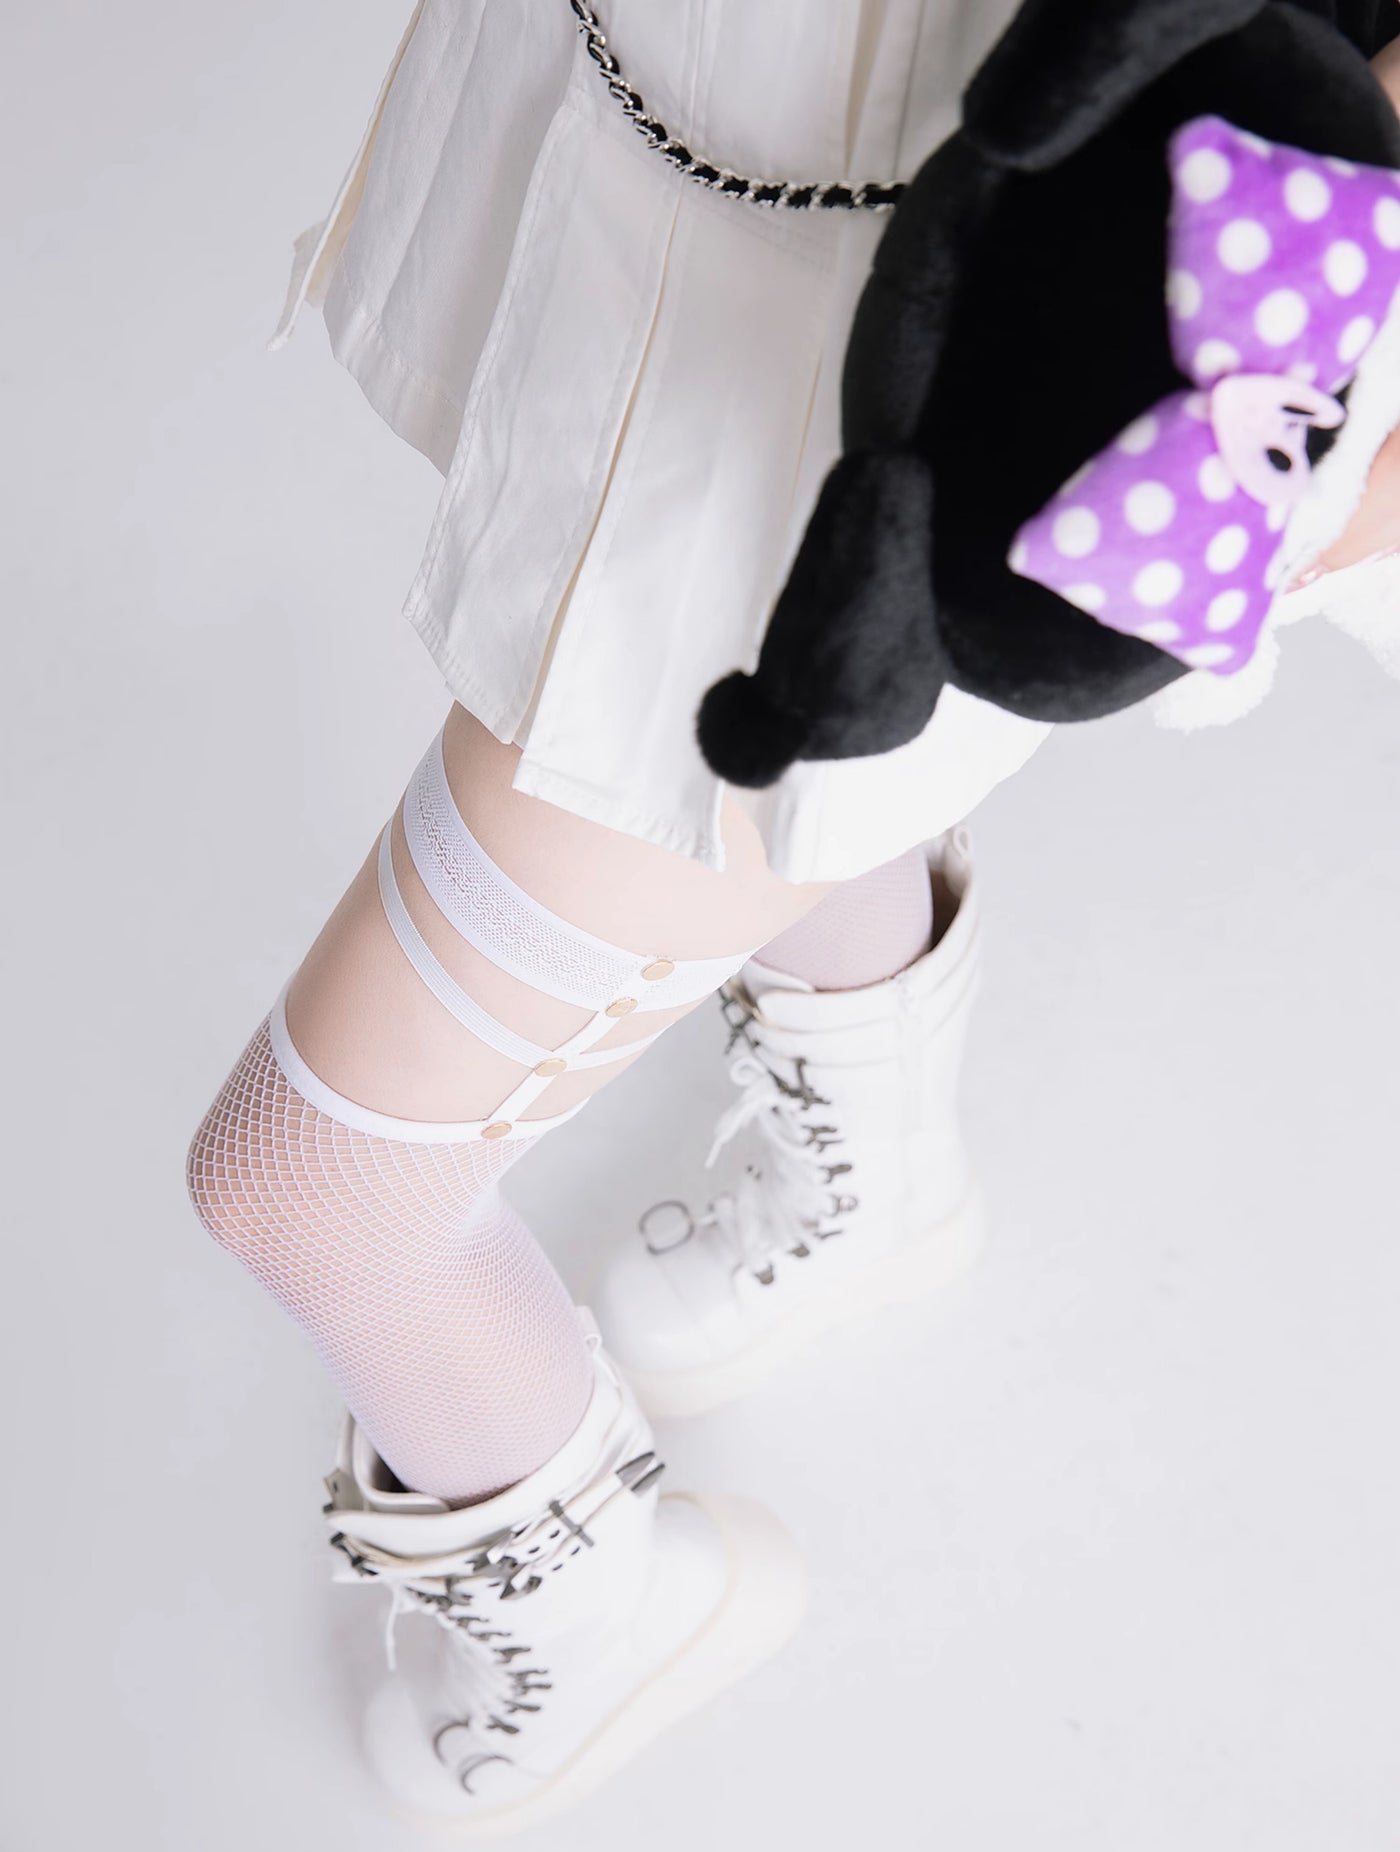 Arrive on the first floor~Punk Lolita Lace Stockings   